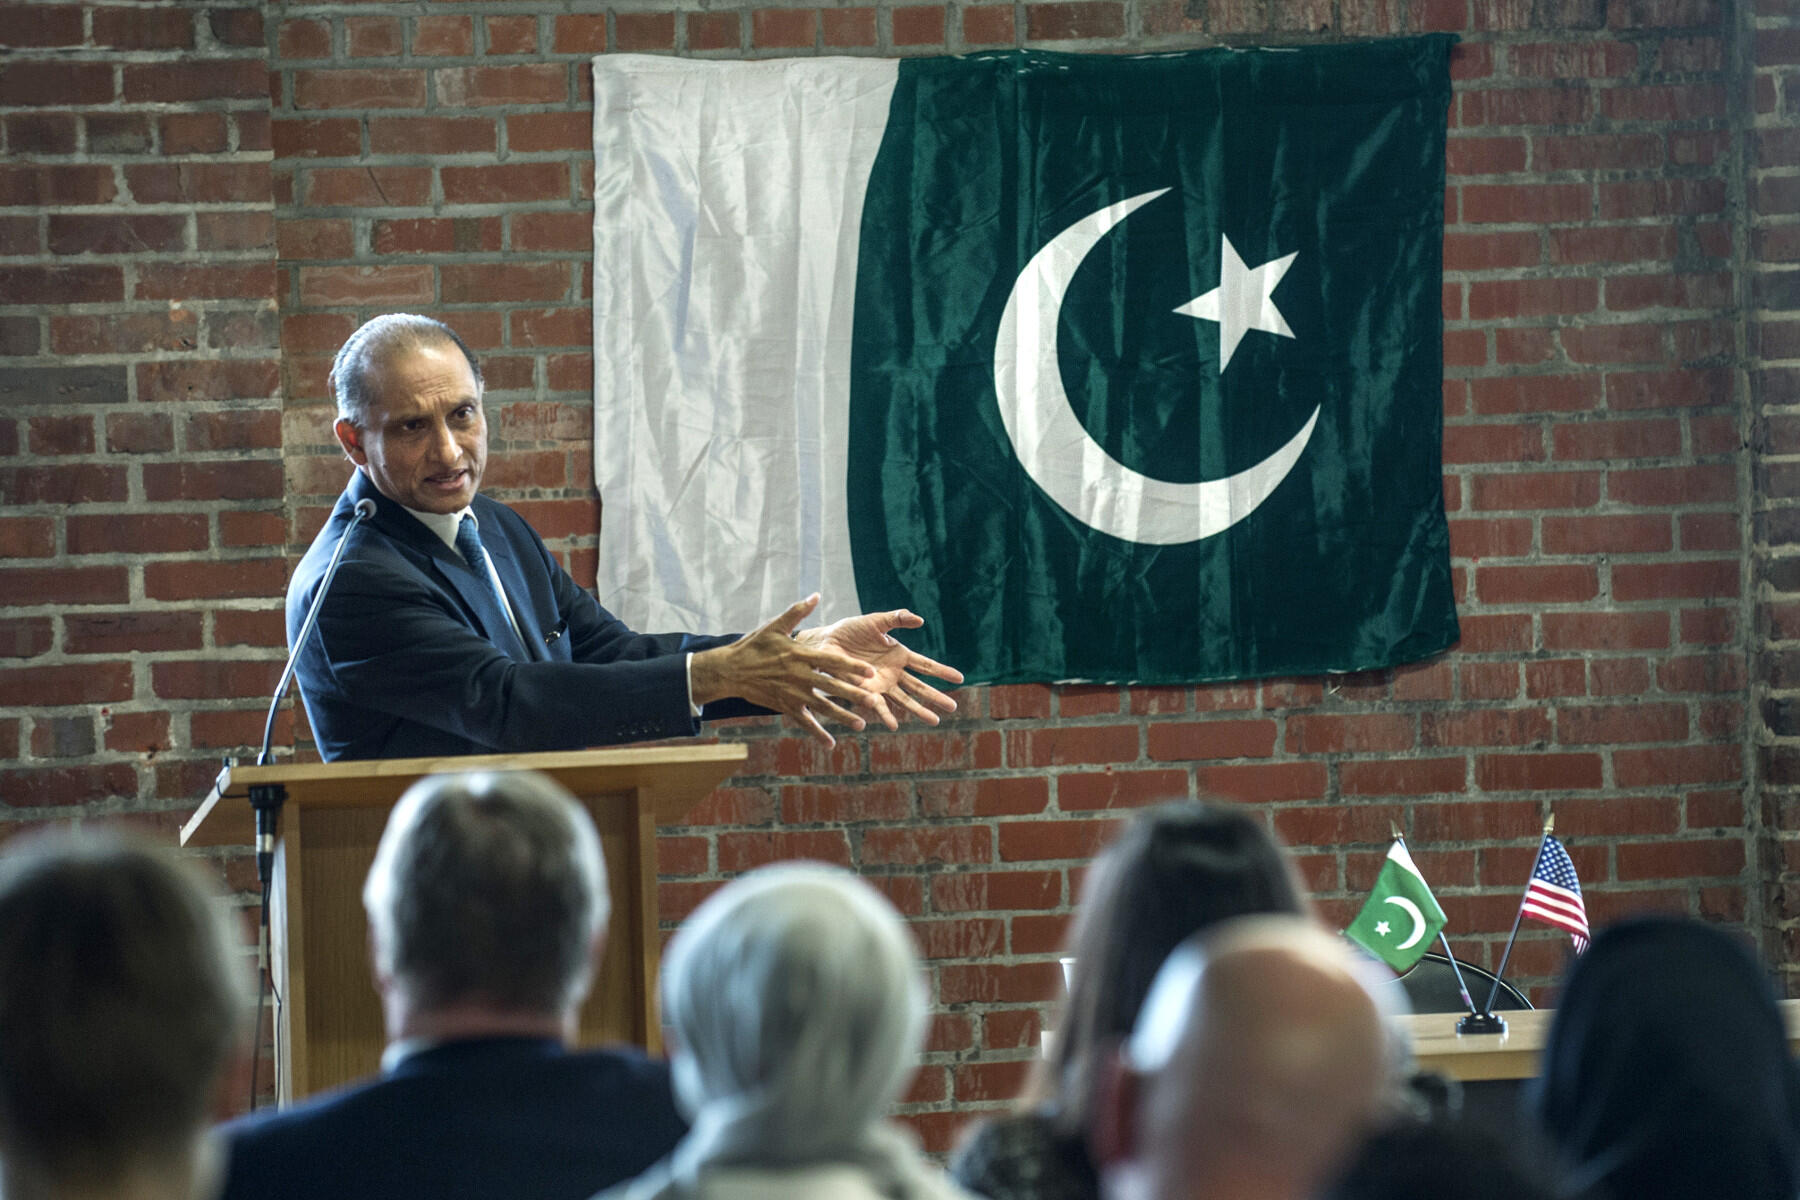 Chaudhry argued against a military solution to stabilize Afghanistan, saying instead that a comprehensive political solution is needed. Photo by Kevin Morley/University Marketing.